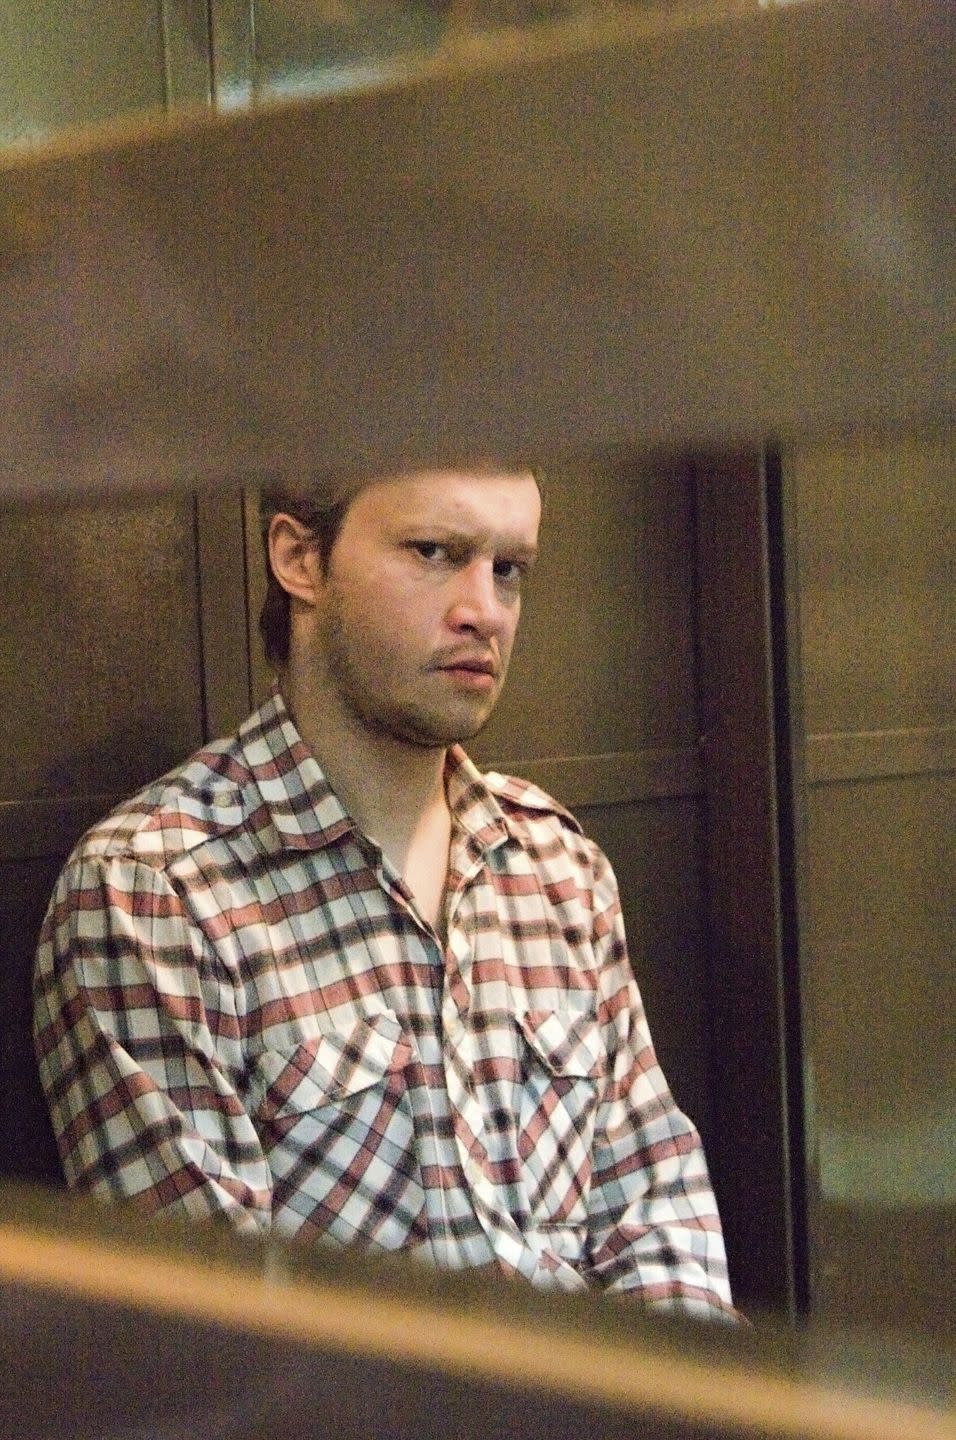 alexander pichushkin sitting in a defendants cage and looking to his right toward the camera lens